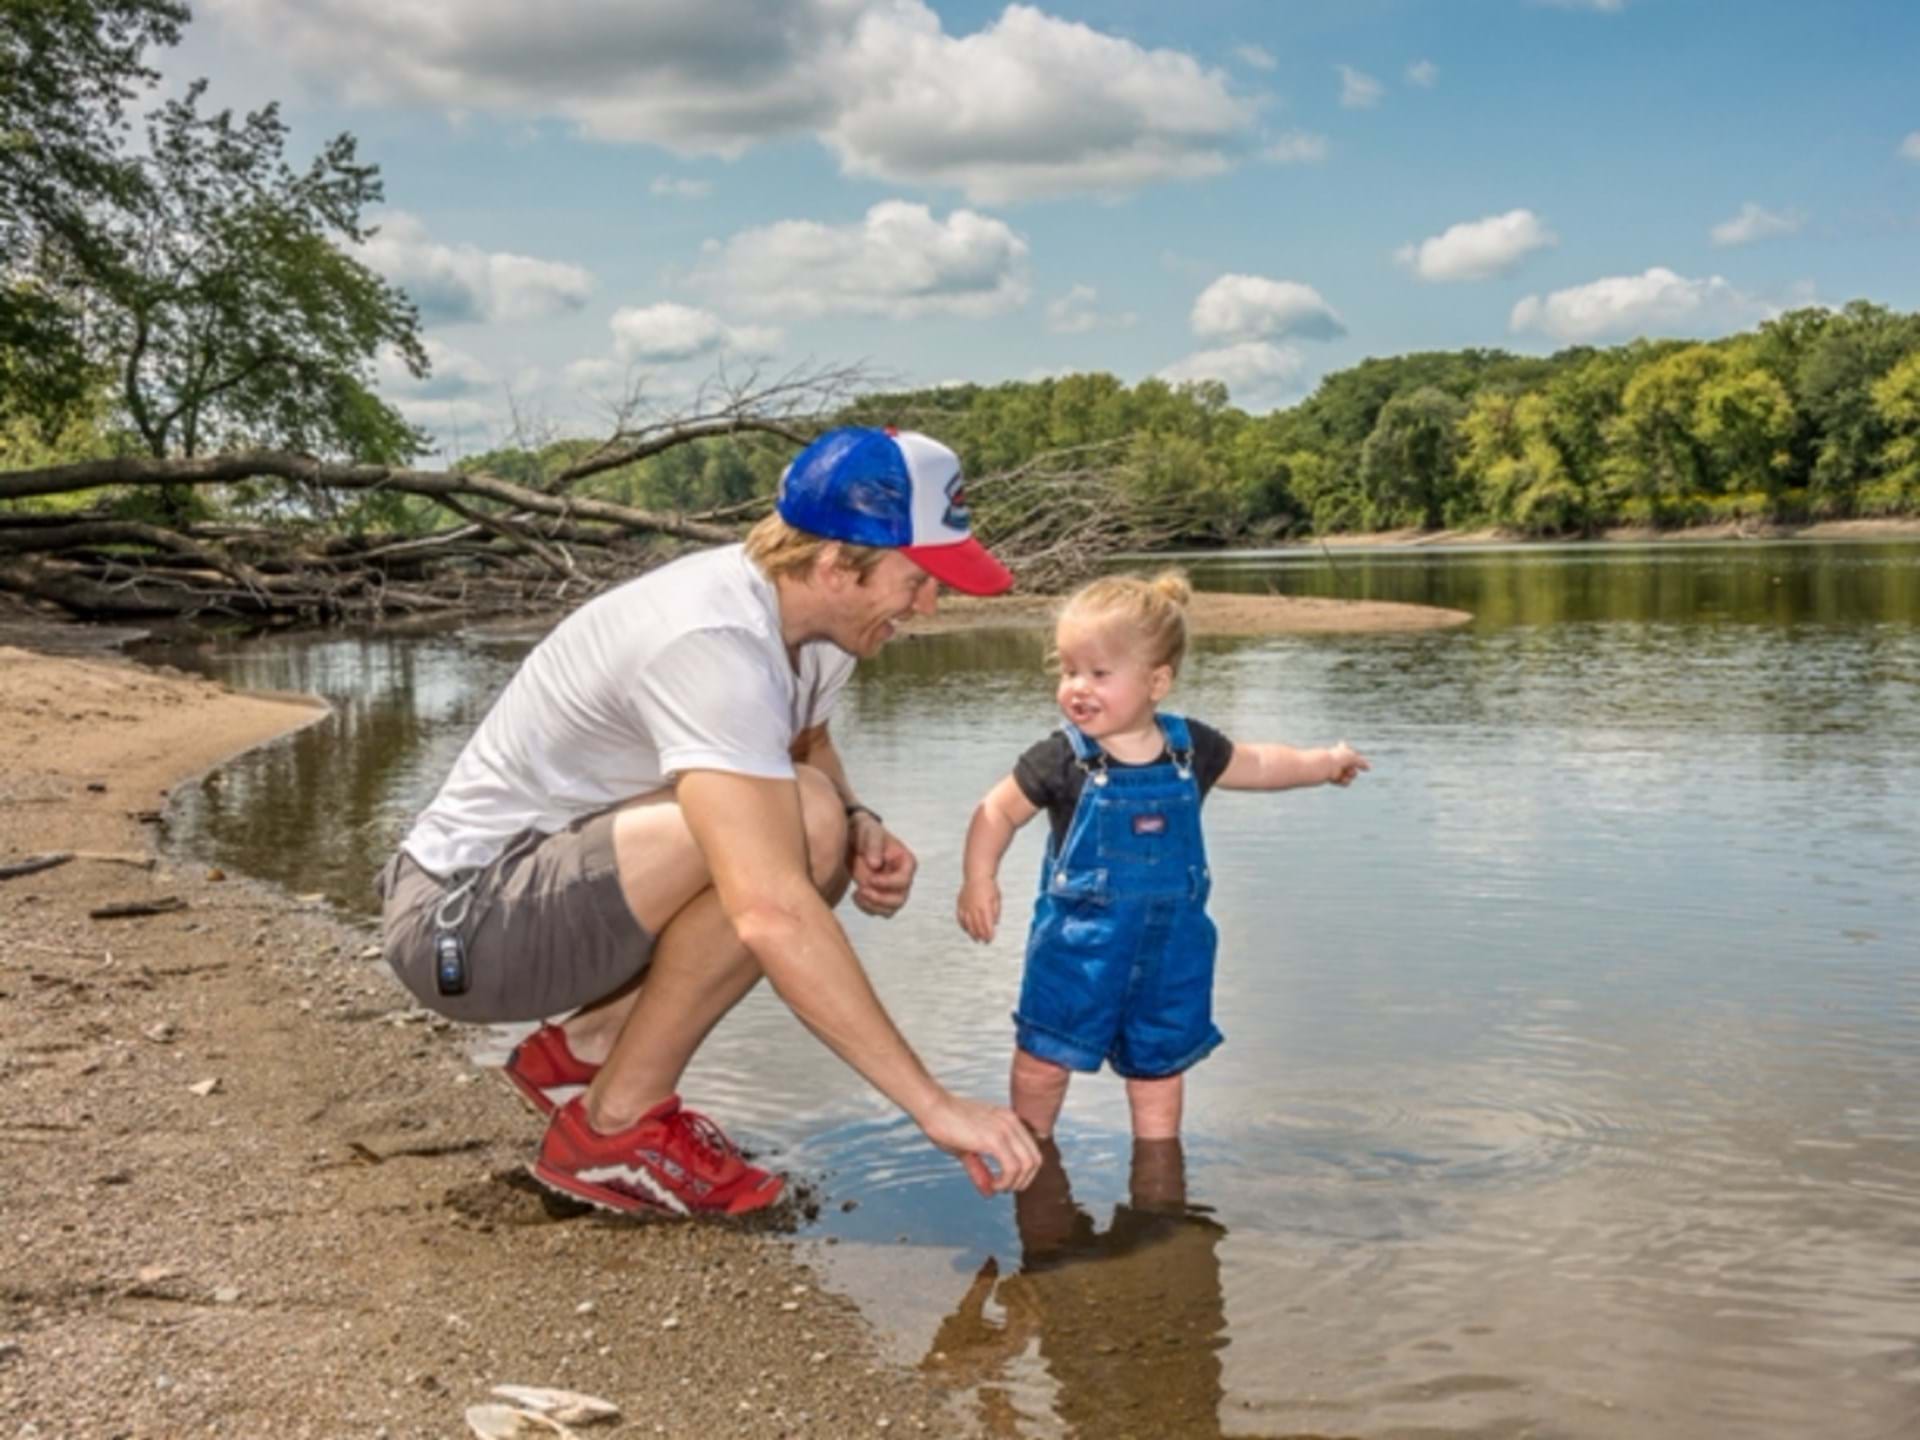 Lake Manatt is a great place to canoe, fish, and have fun with family. (Photo by John McCormick)